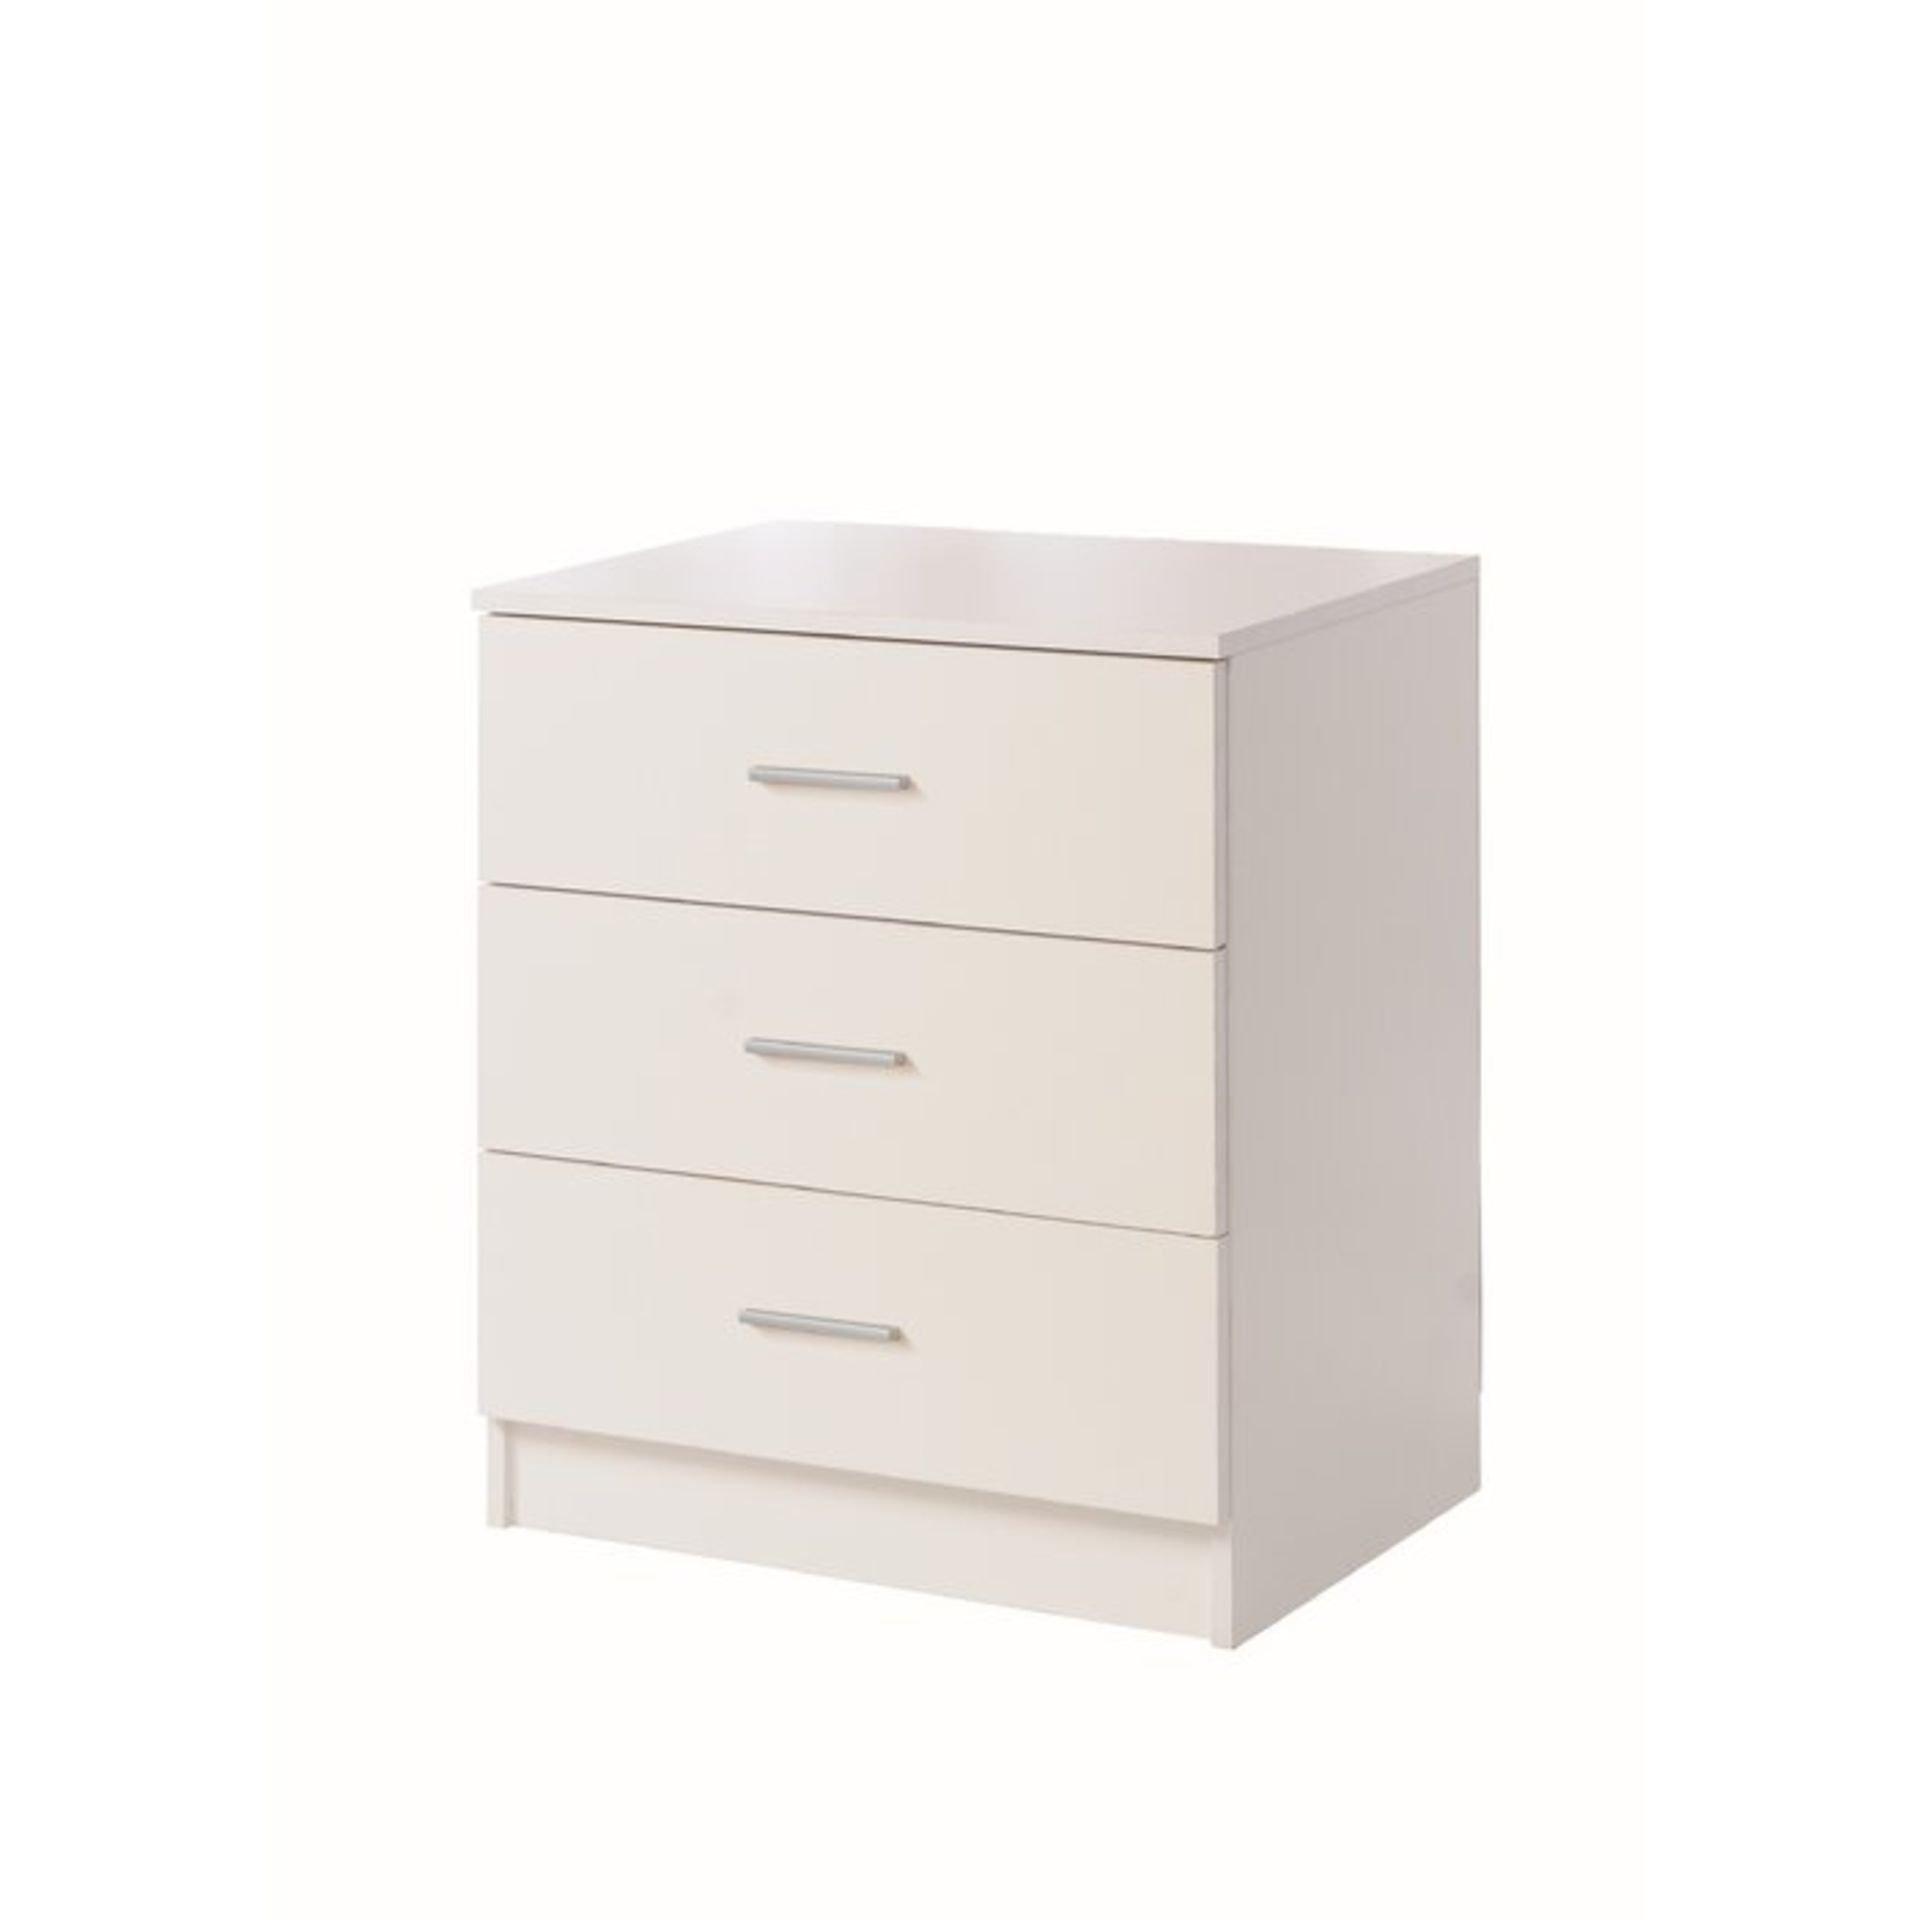 Willette 3 Drawer Chest - RRP £67.99 - Image 2 of 2